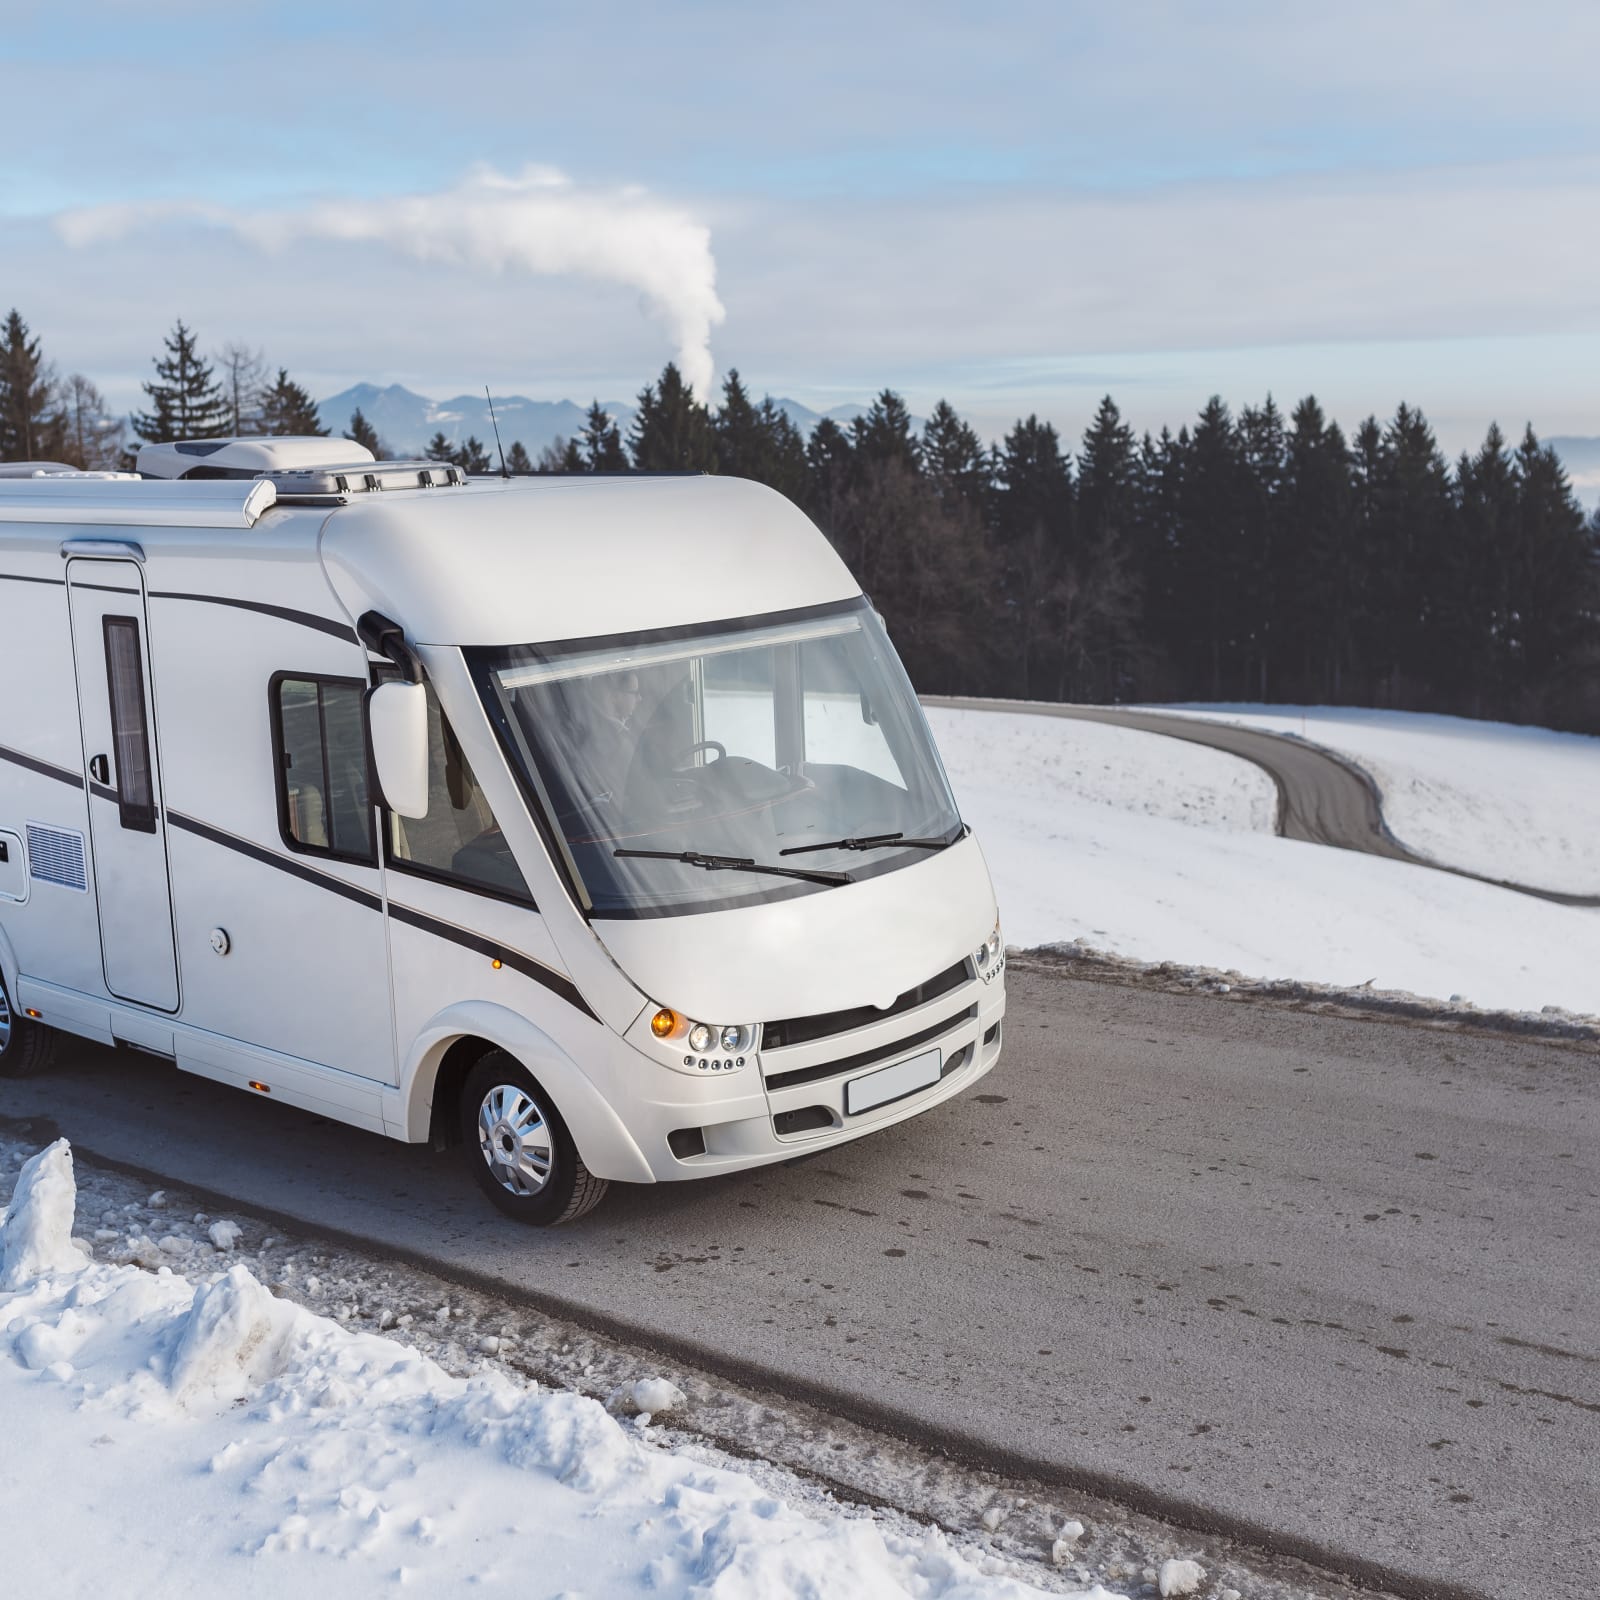 The Best Rv Insurance Companies In 2021 - Valuepenguin